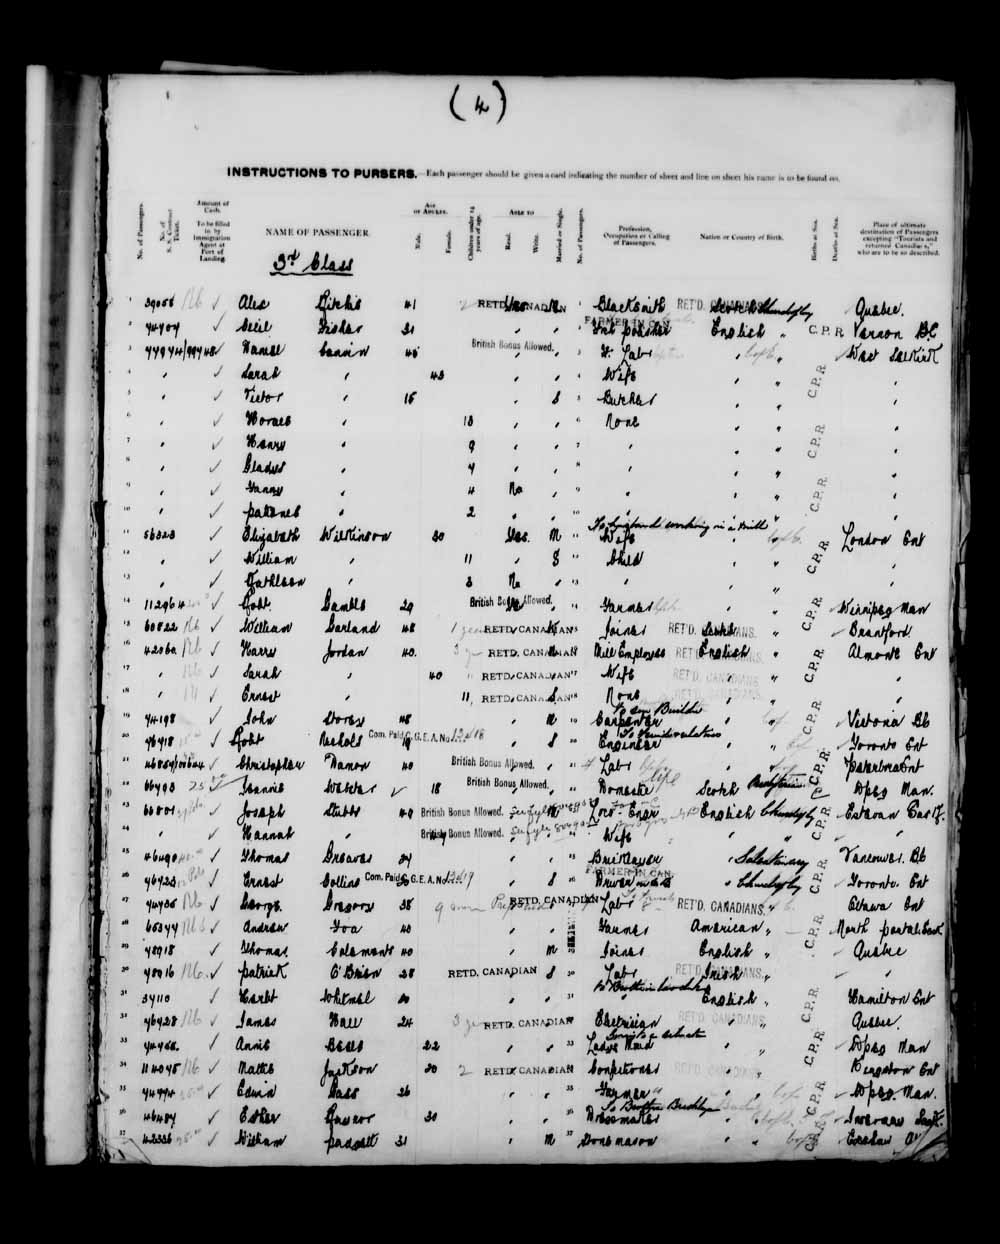 Digitized page of Quebec Passenger Lists for Image No.: e003591254